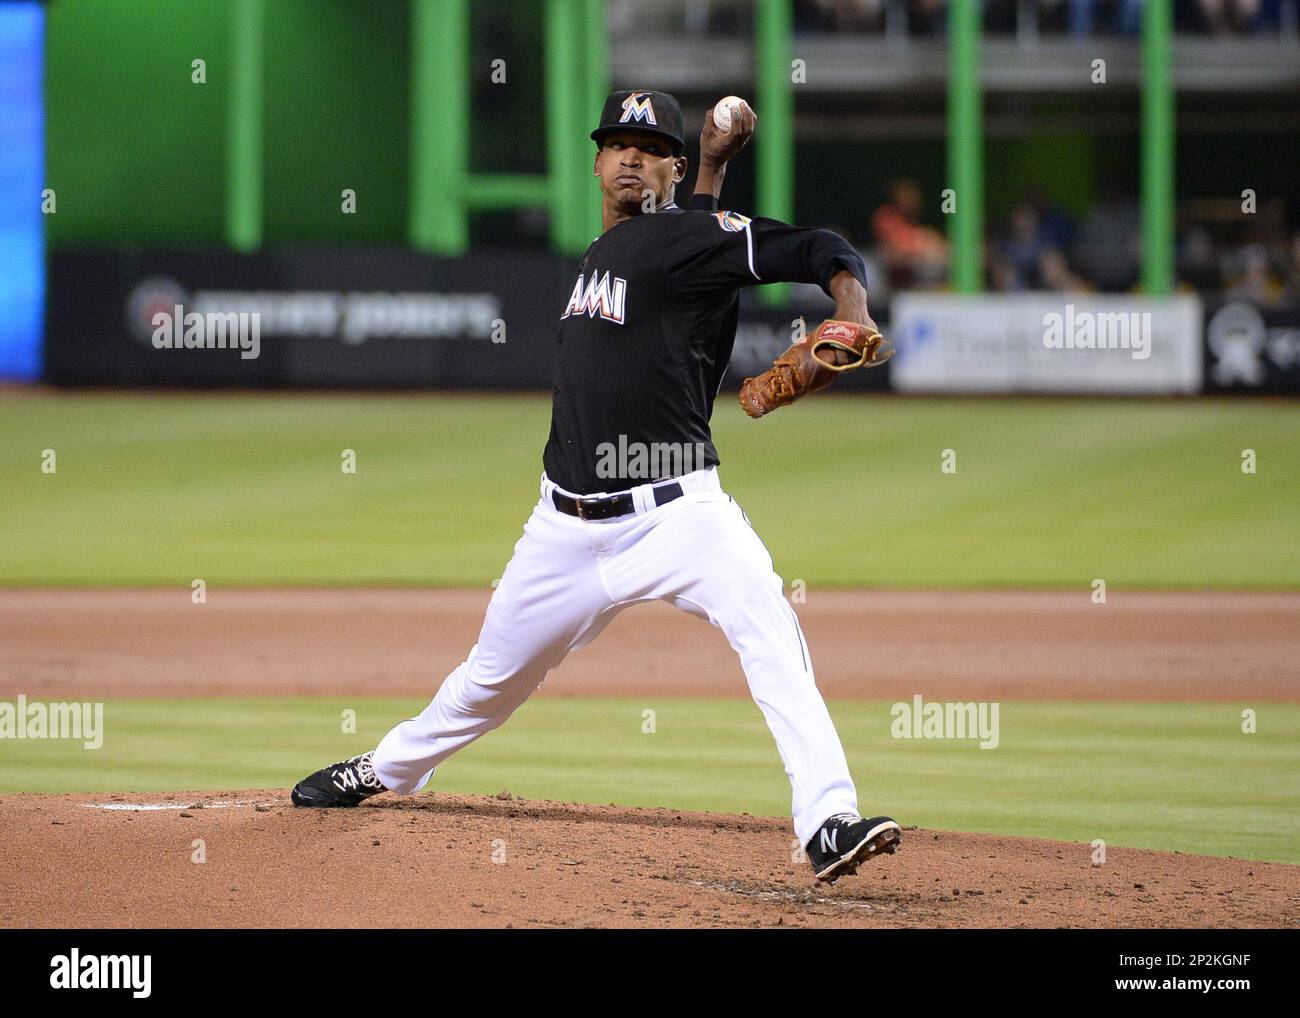 Marlins, Urena roughed up early in Opening Day loss to Cubs – Sun